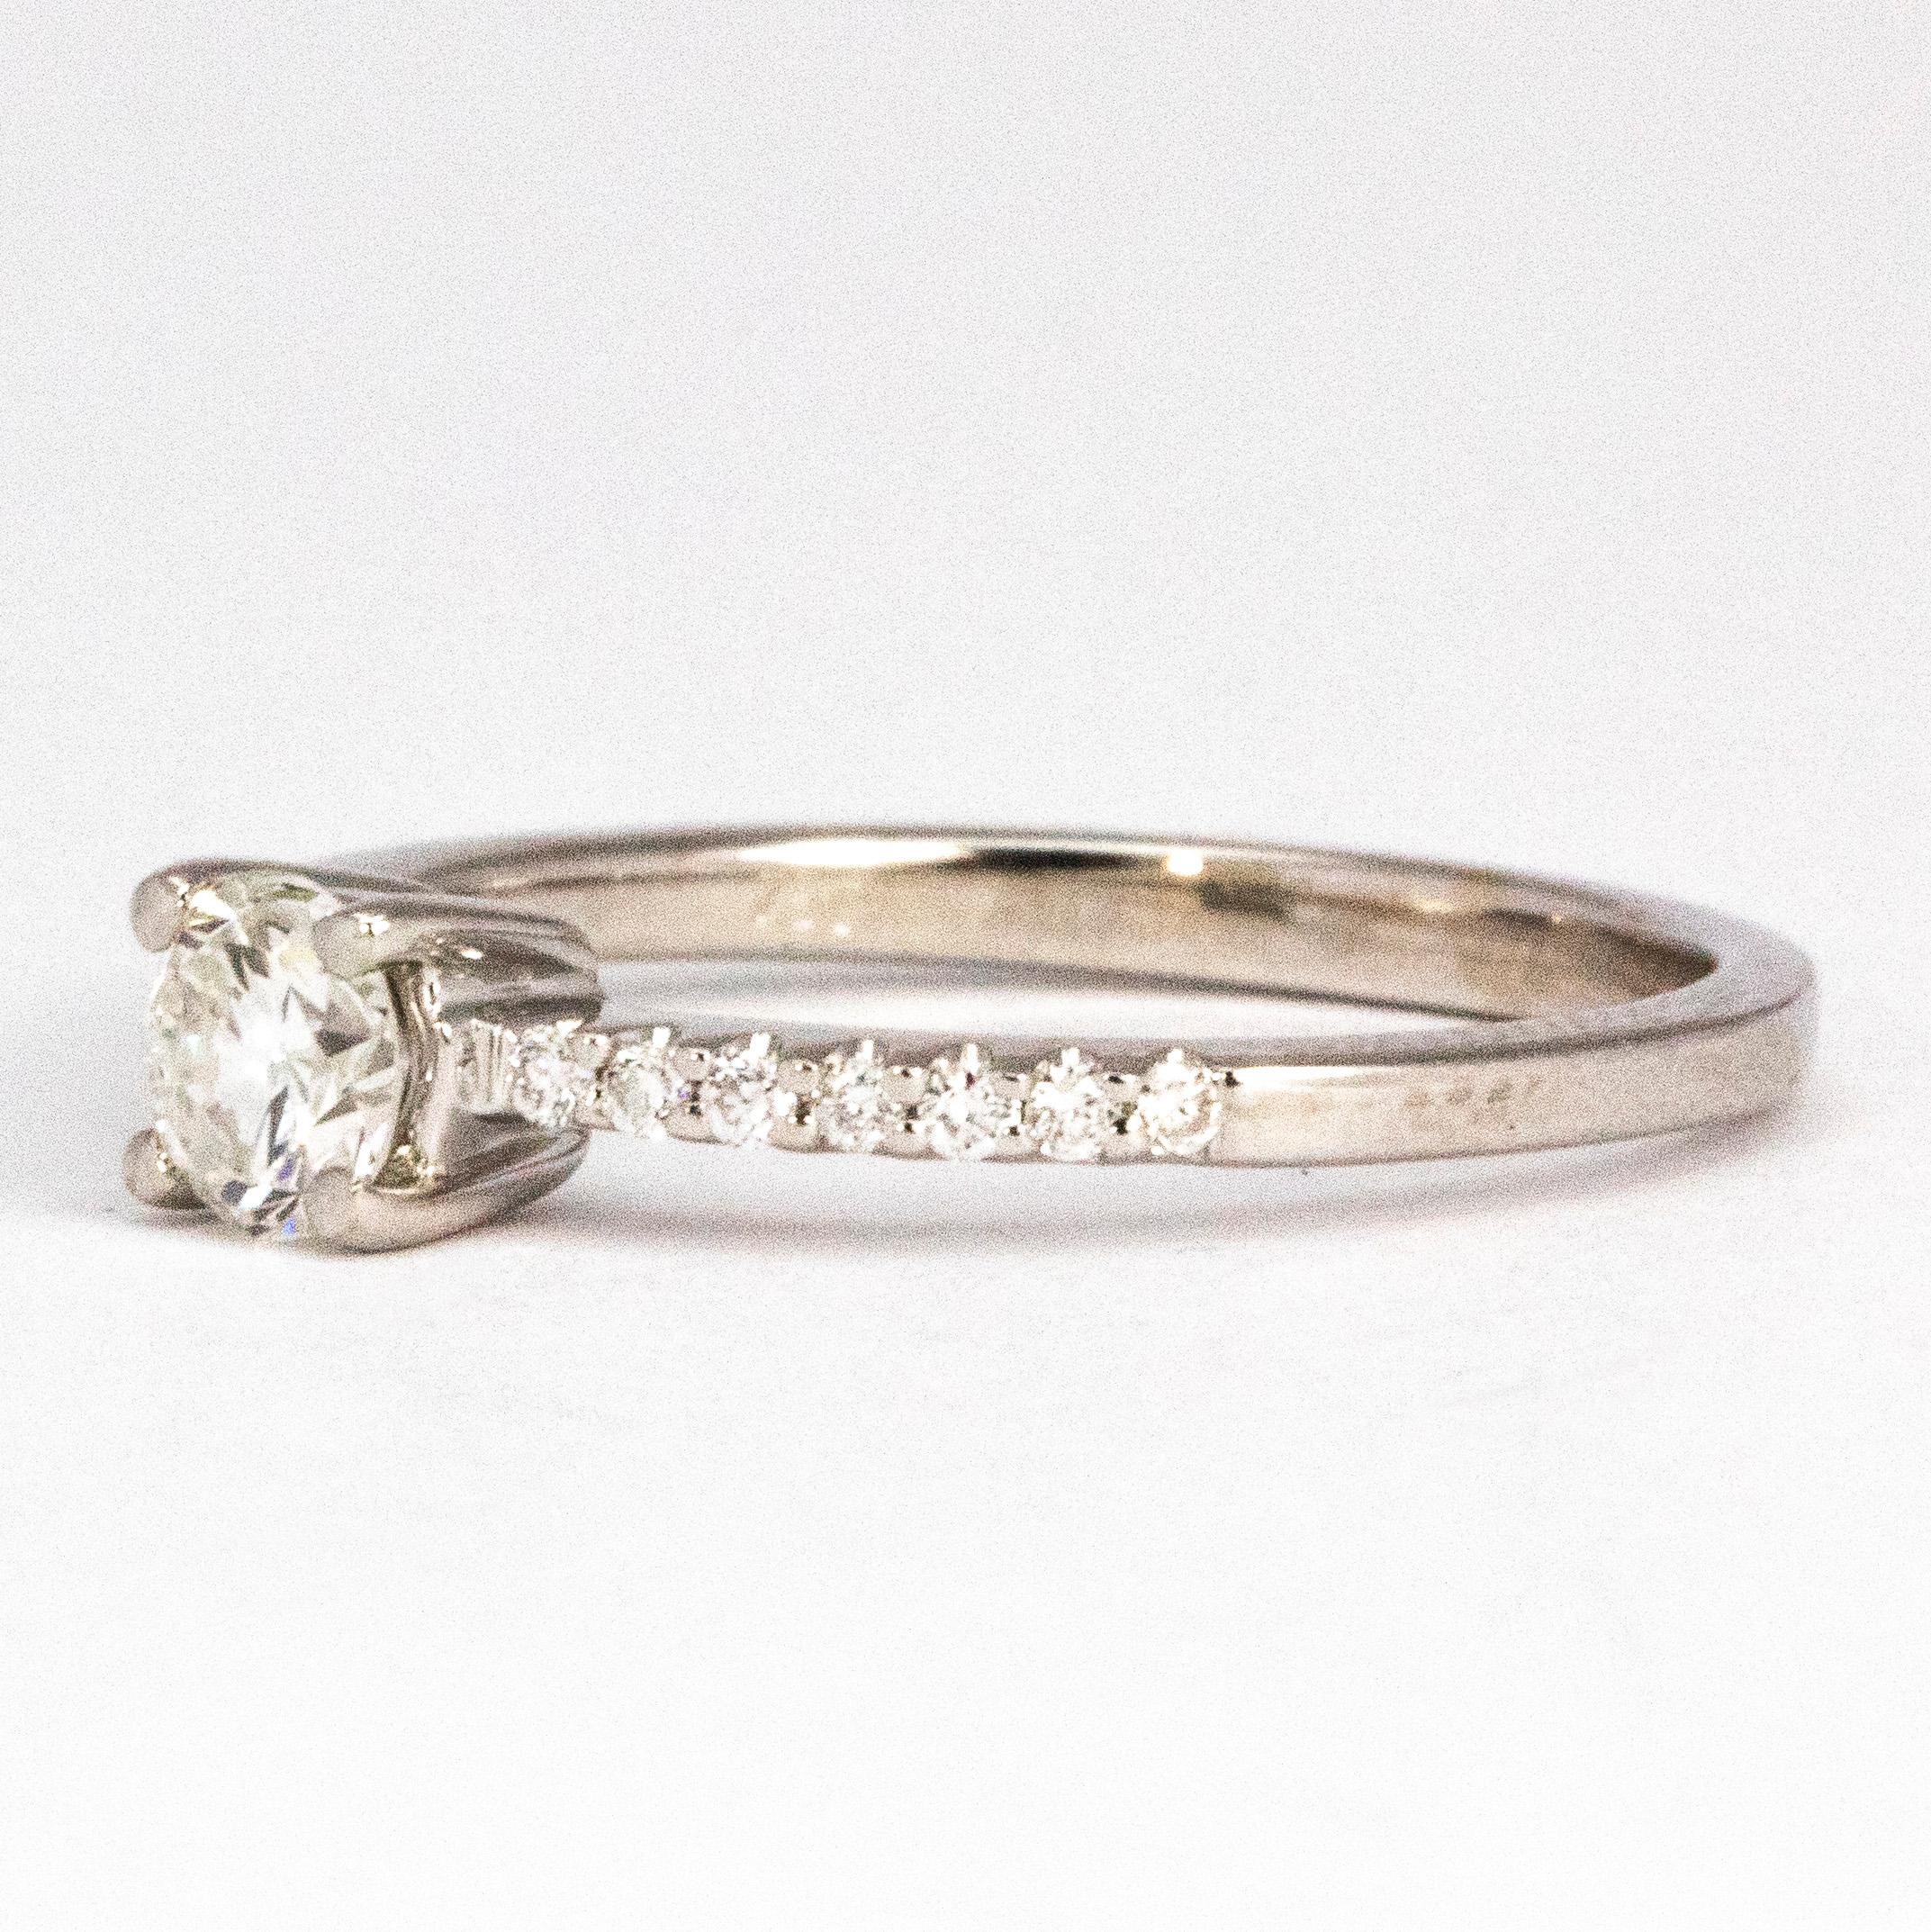 This simple solitaire ring has a central brilliant cut diamond measuring 35cts. The shoulders have diamonds running through on to the band. The diamonds on the shoulders each and sit in delicate settings on the band. 

Ring Size: L 1/2 or 6
